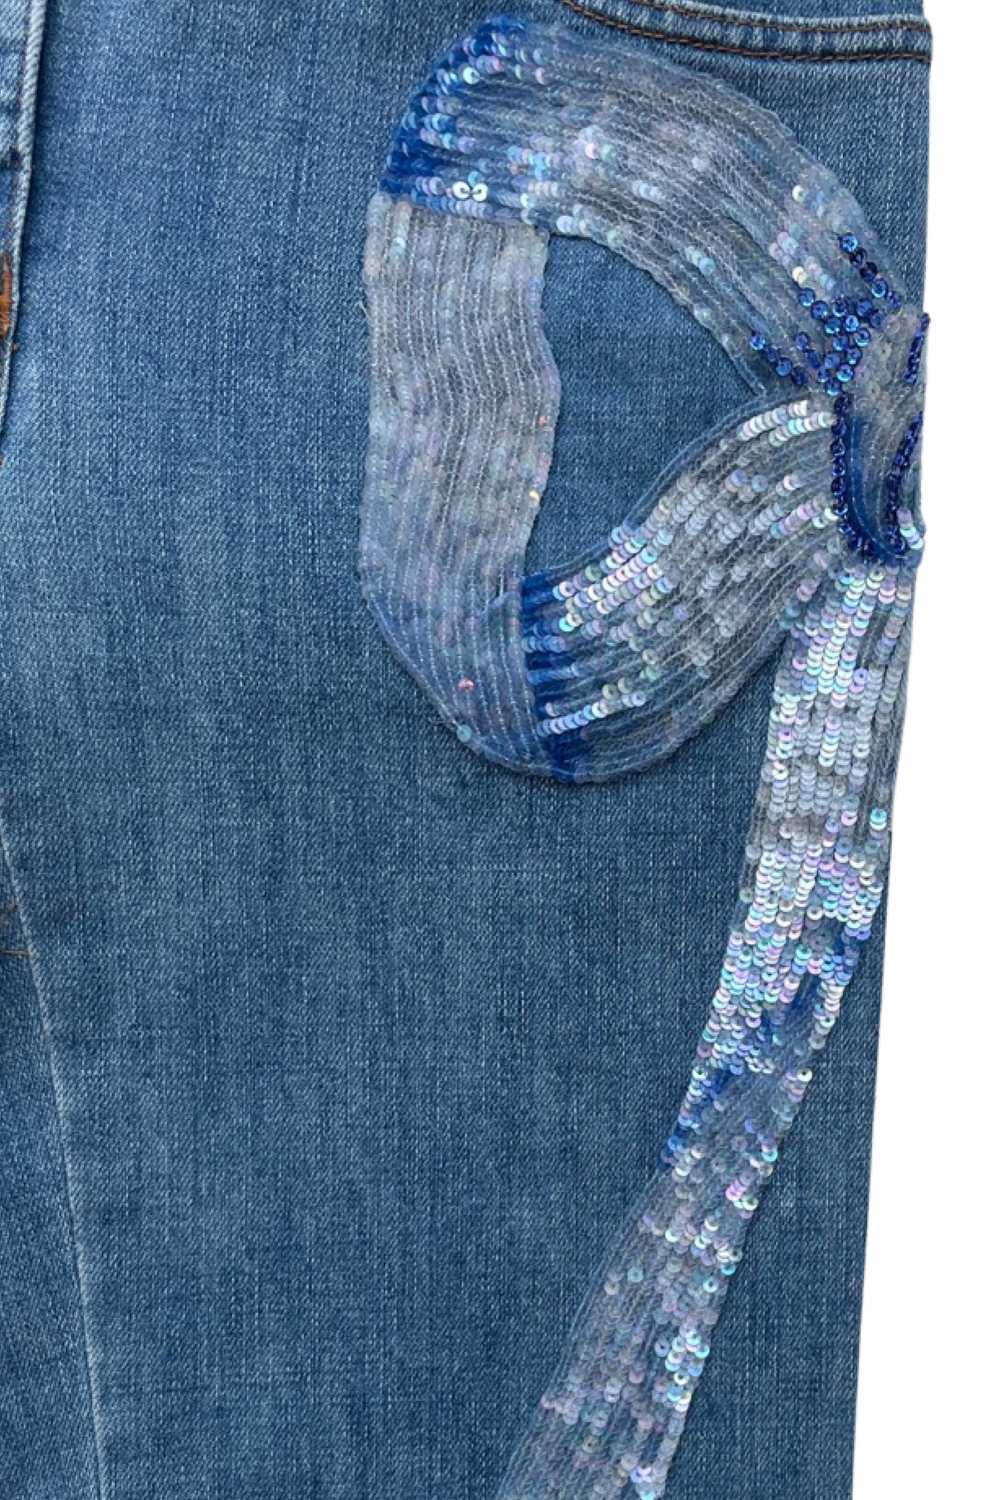 VALENTINO SEQUIN BOW PRINT JEANS 2006 - image 4